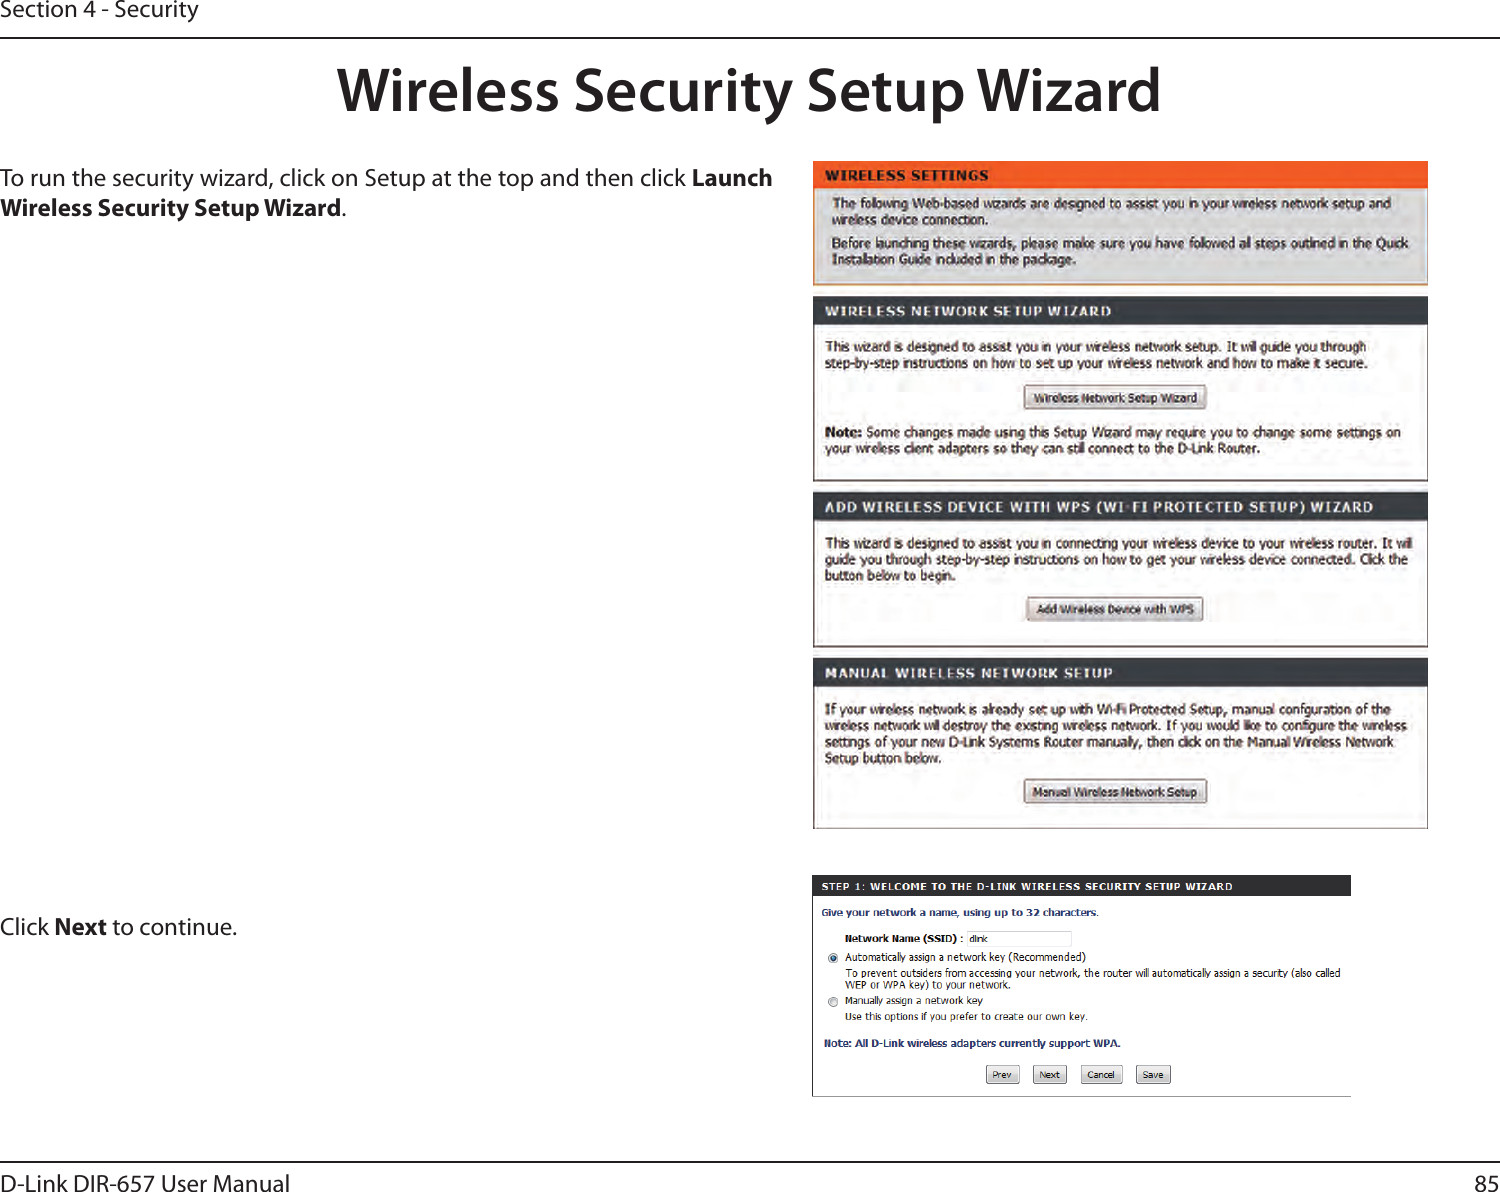 85D-Link DIR-657 User ManualSection 4 - SecurityWireless Security Setup WizardTo run the security wizard, click on Setup at the top and then click Launch Wireless Security Setup Wizard.Click Next to continue.